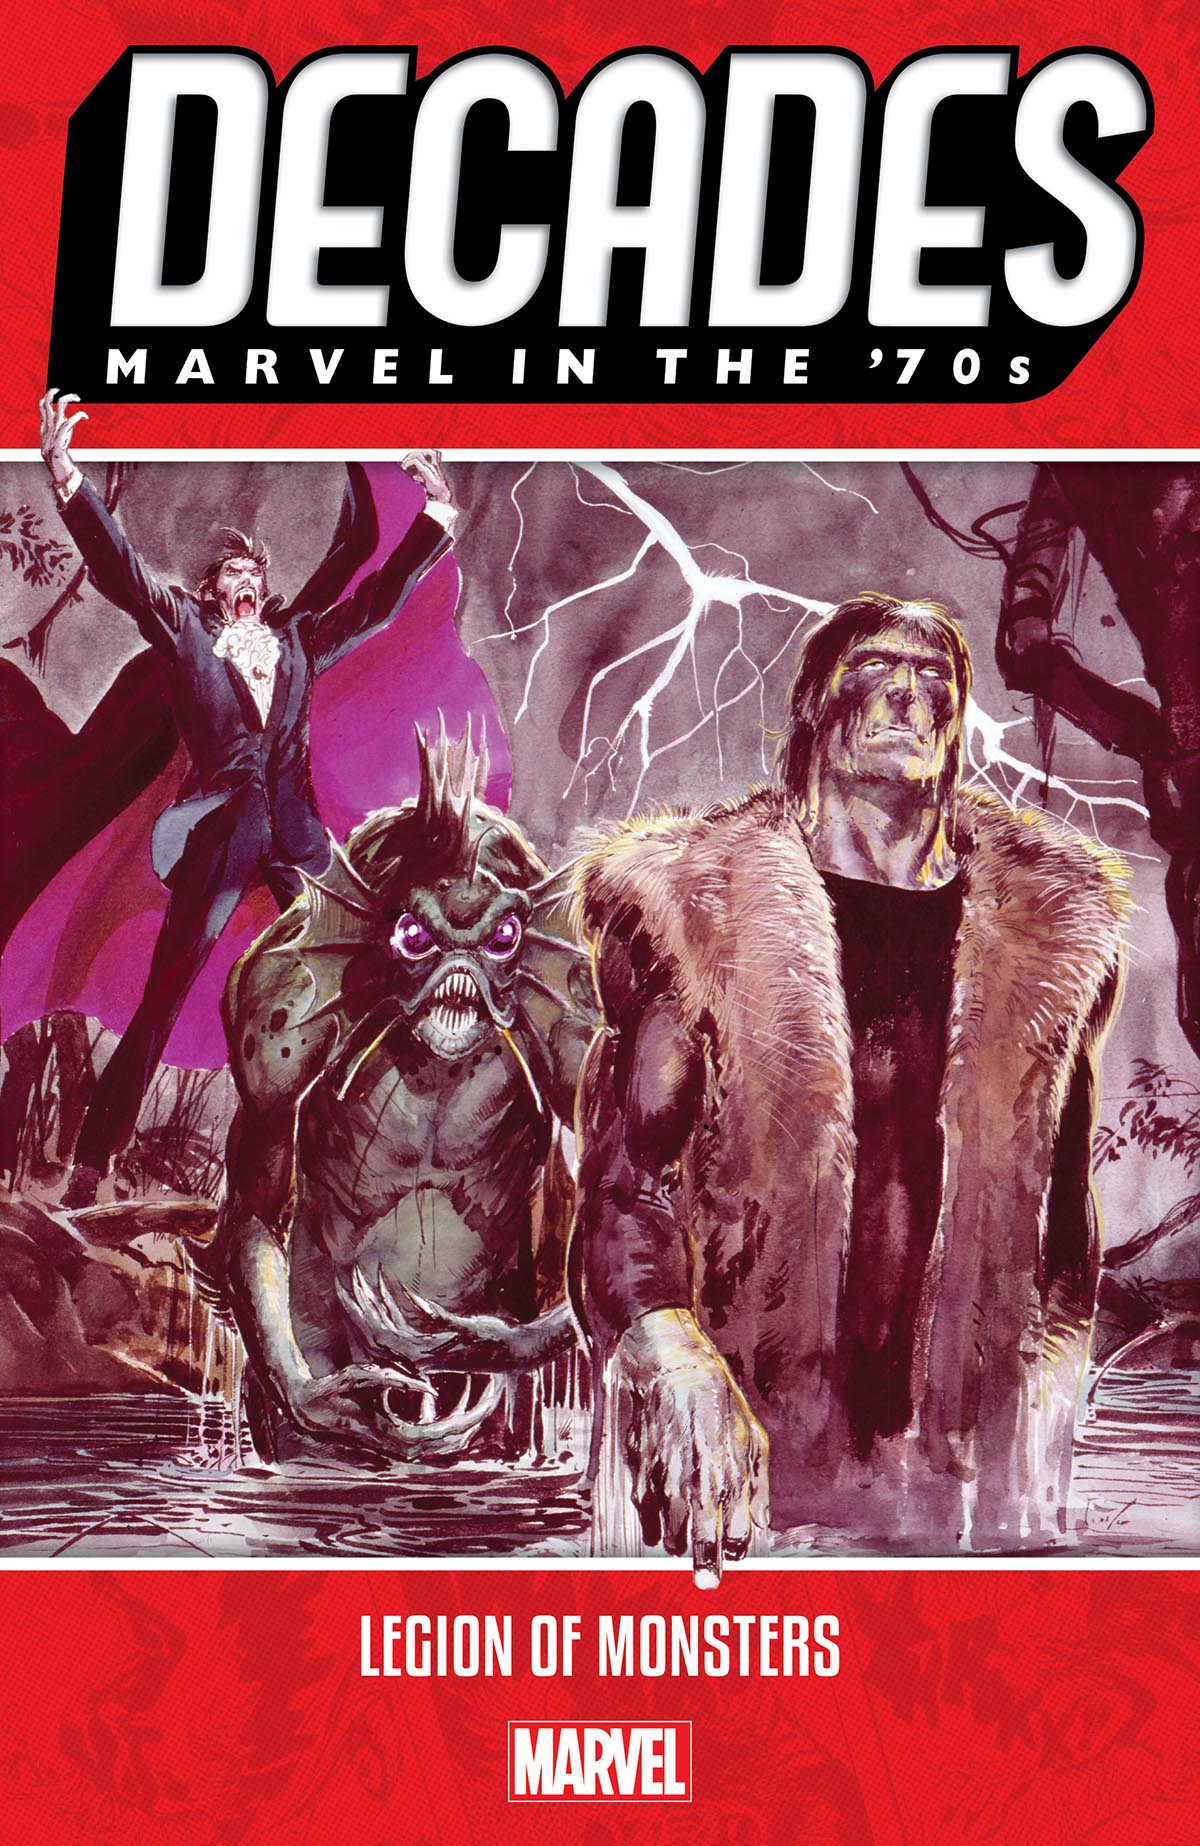 Decades: Marvel In The '70s - Legion Of Monsters (Trade Paperback)